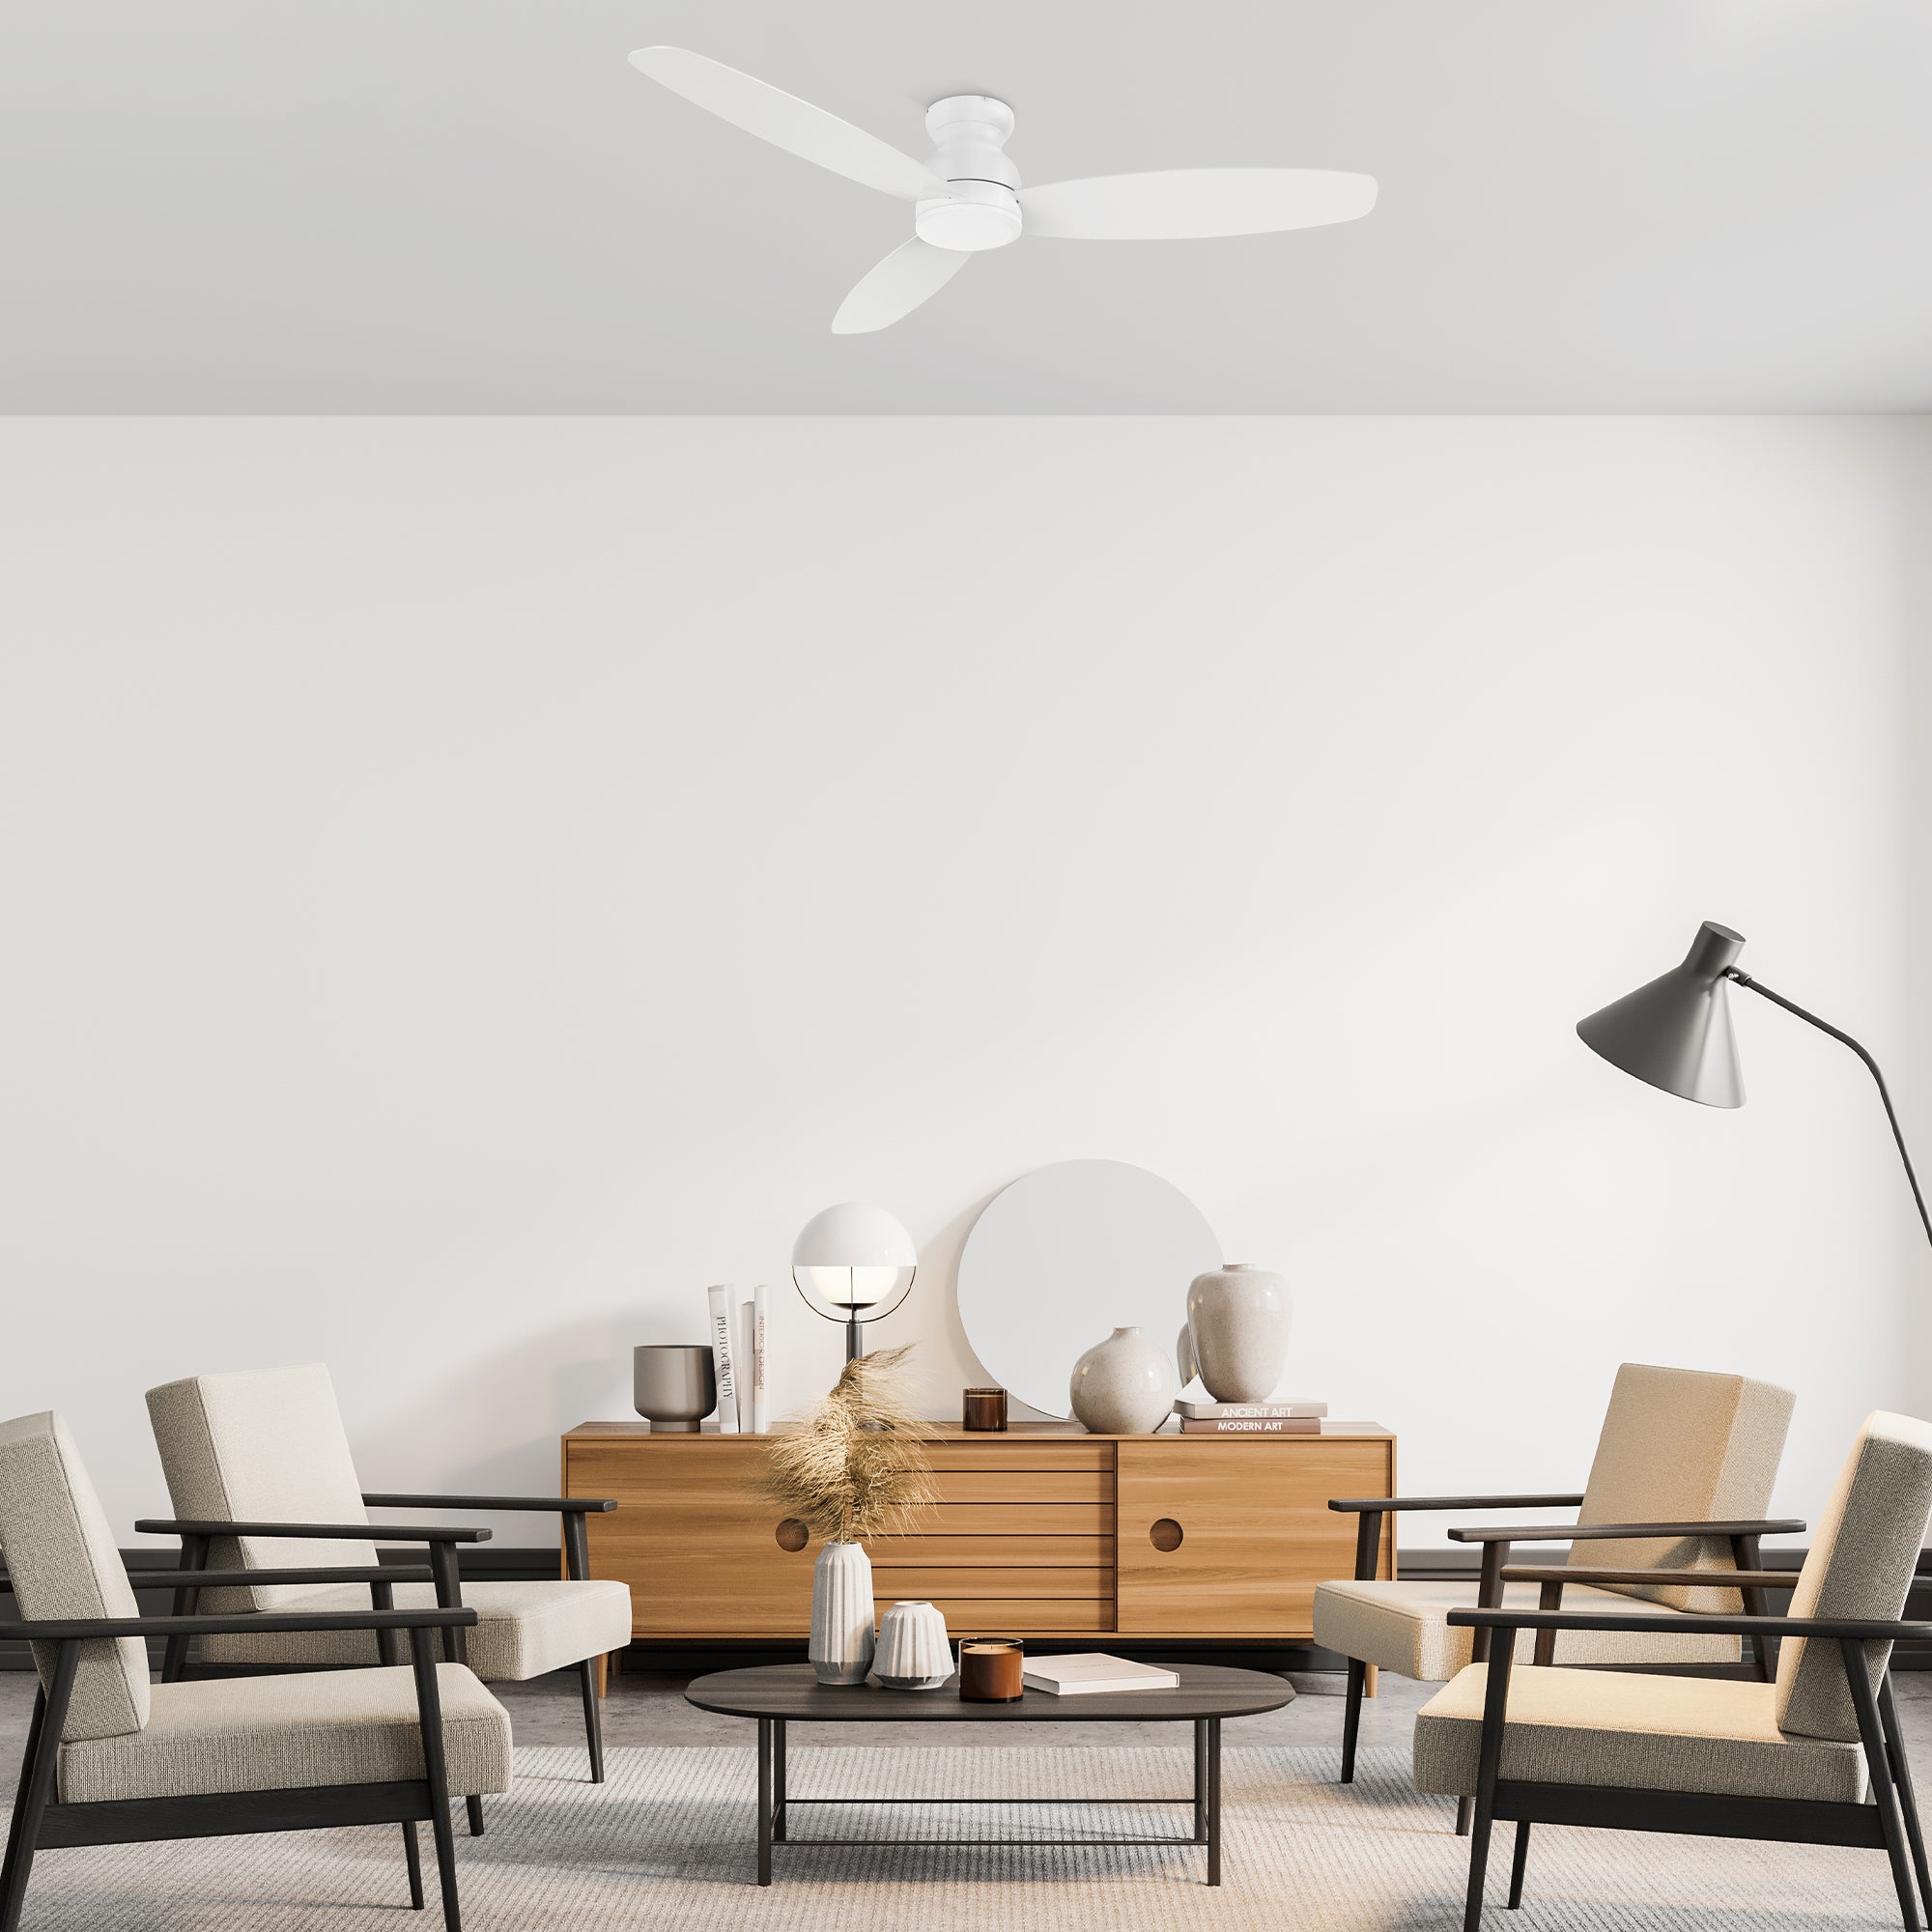 Enjoy a cooling breeze and relaxing controling in an elegant large space with the Smafan Osborn 60 inch indoor ceiling fan. The fan is equipped with the latest motor and controling technology with a stylish exterior to suit the décor of your preference. The fan features a charming black / white finish and sleek blades to cooling up your indoor living spaces. #color_white&light-wood